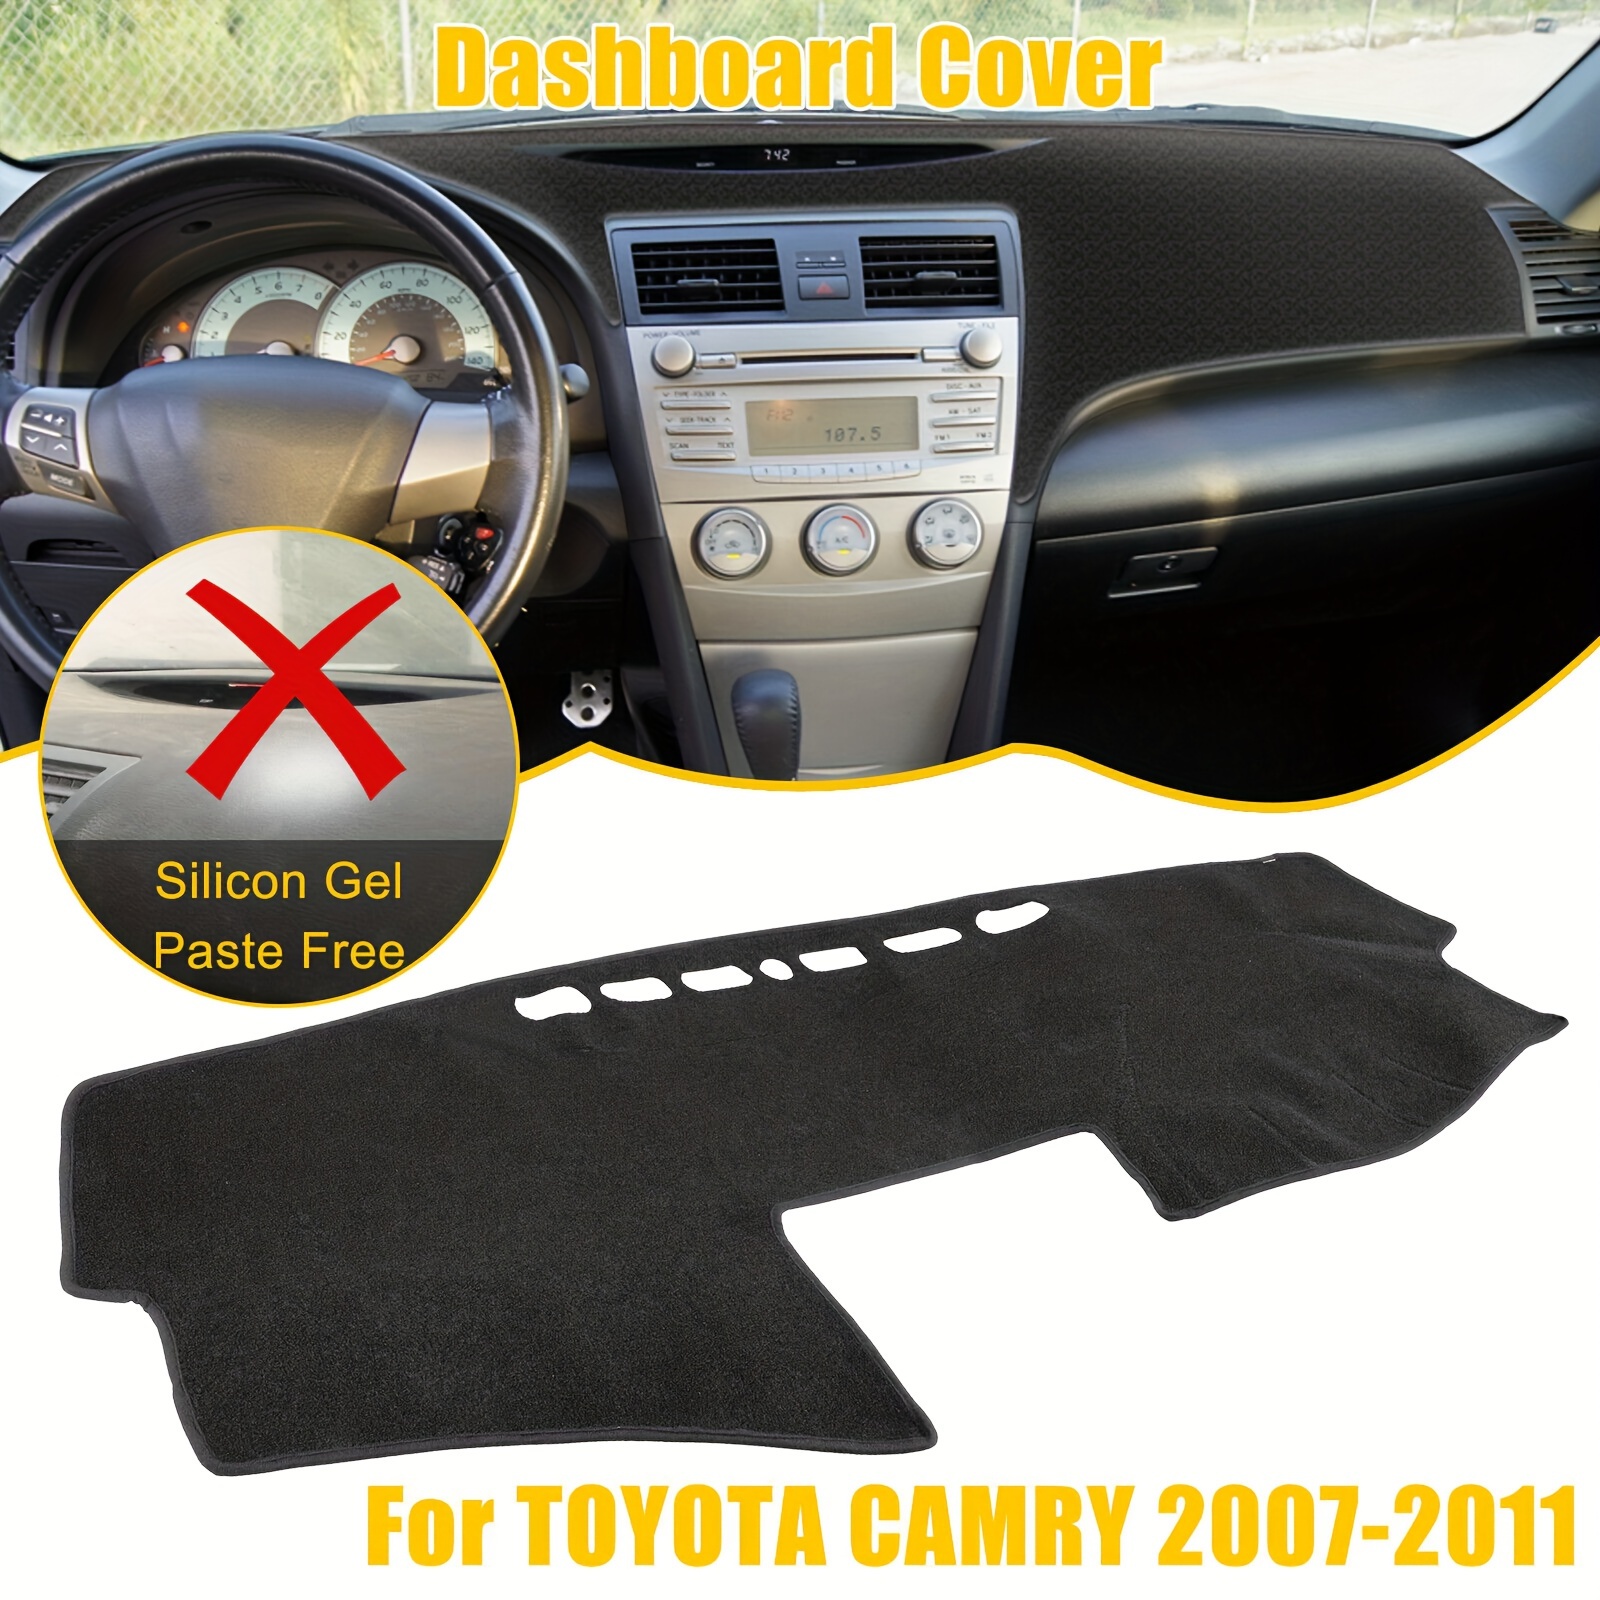 2007-2014 Chevy/GMC Truck & SUV Dash Cover with Speaker Holes - Ebony